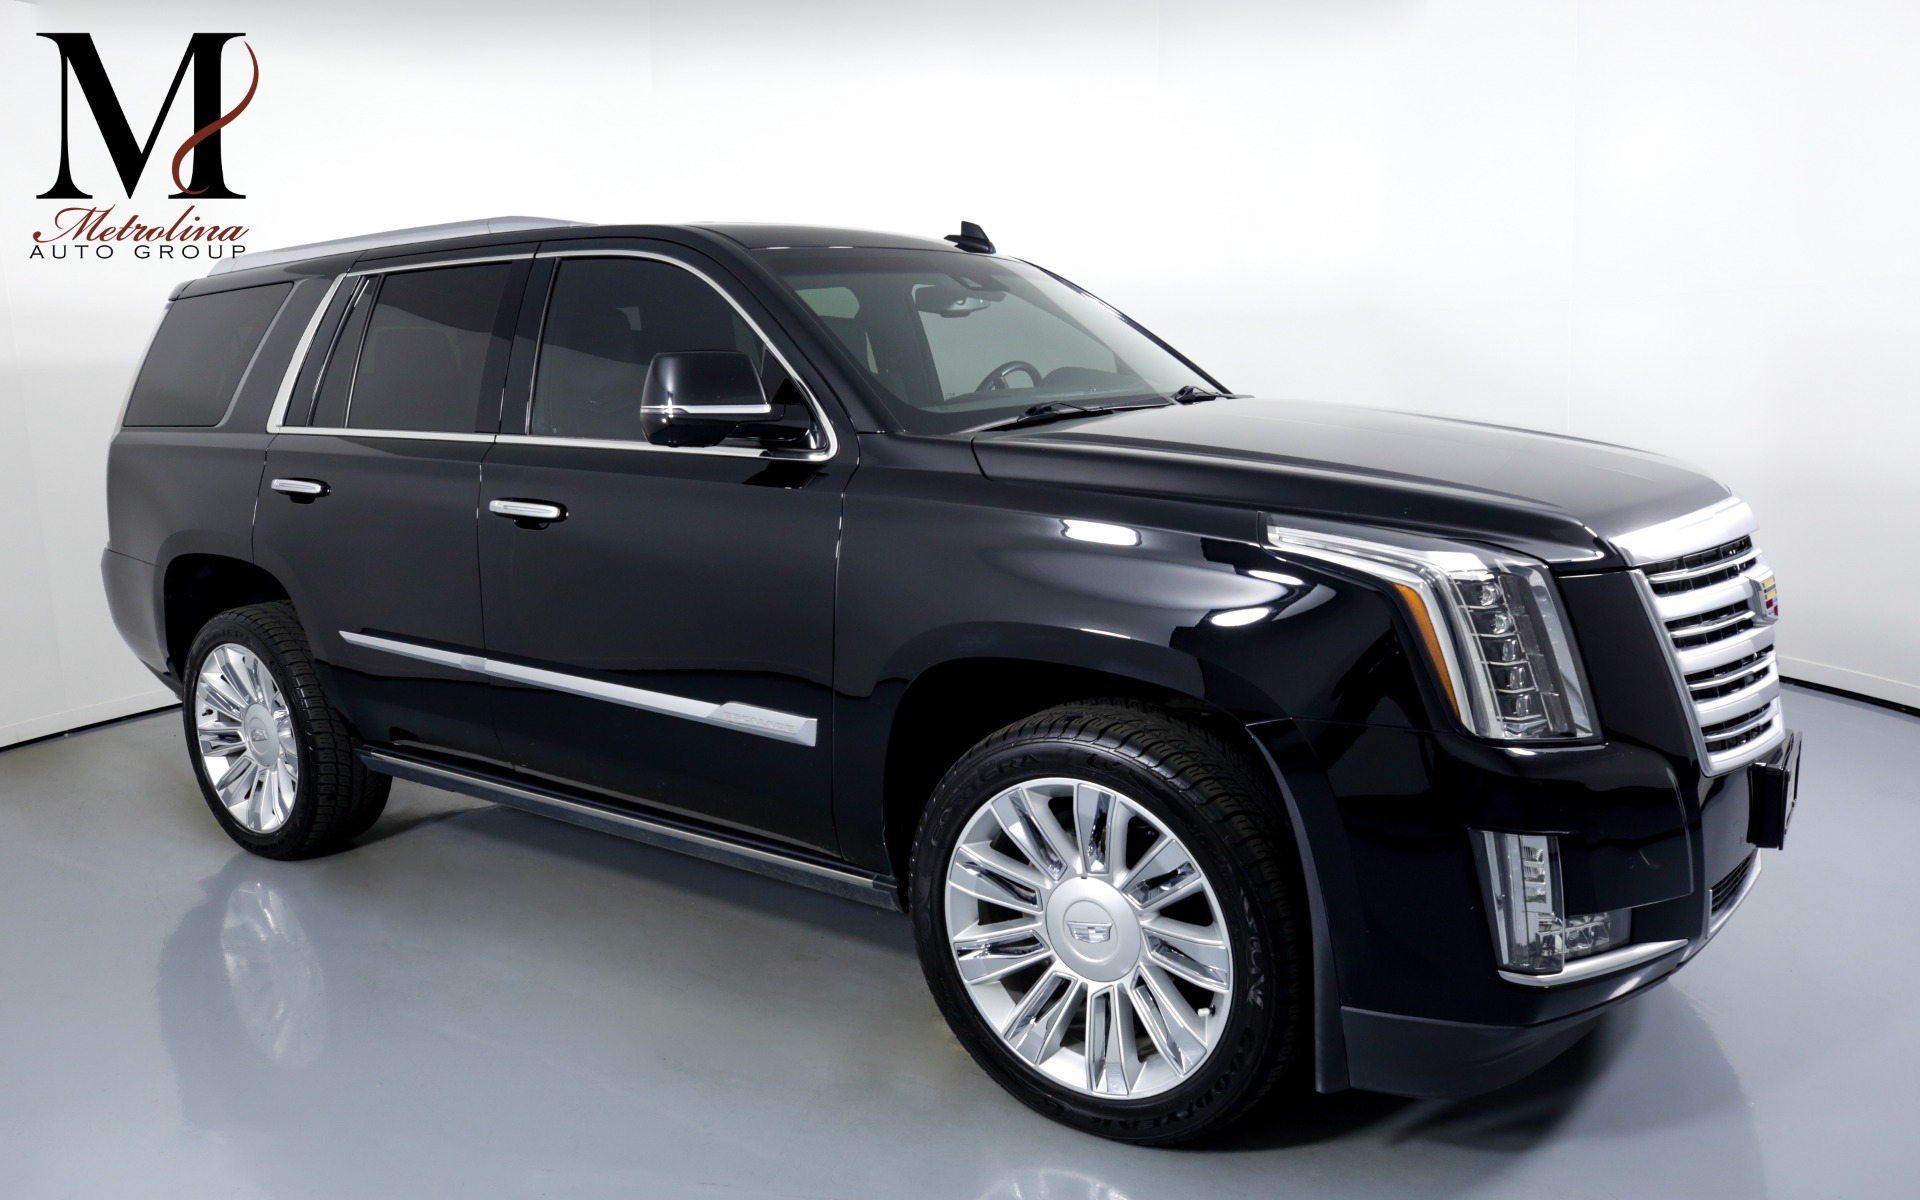 Used 2015 Cadillac Escalade Platinum for sale $39,996 at Metrolina Auto Group in Charlotte NC 28217 - 1